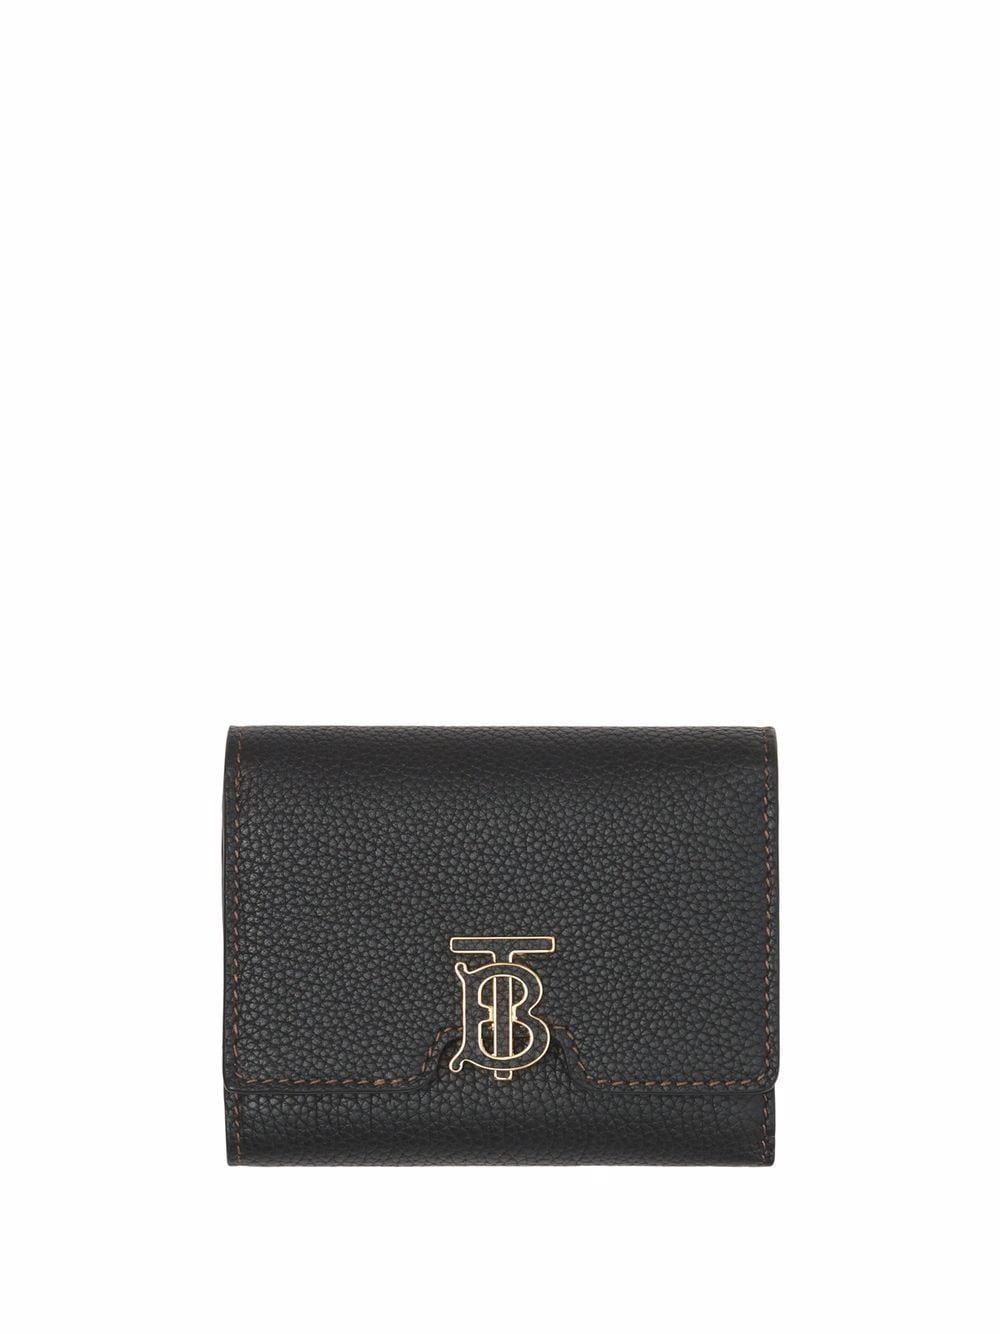 Image 1 of Burberry monogram grained leather wallet